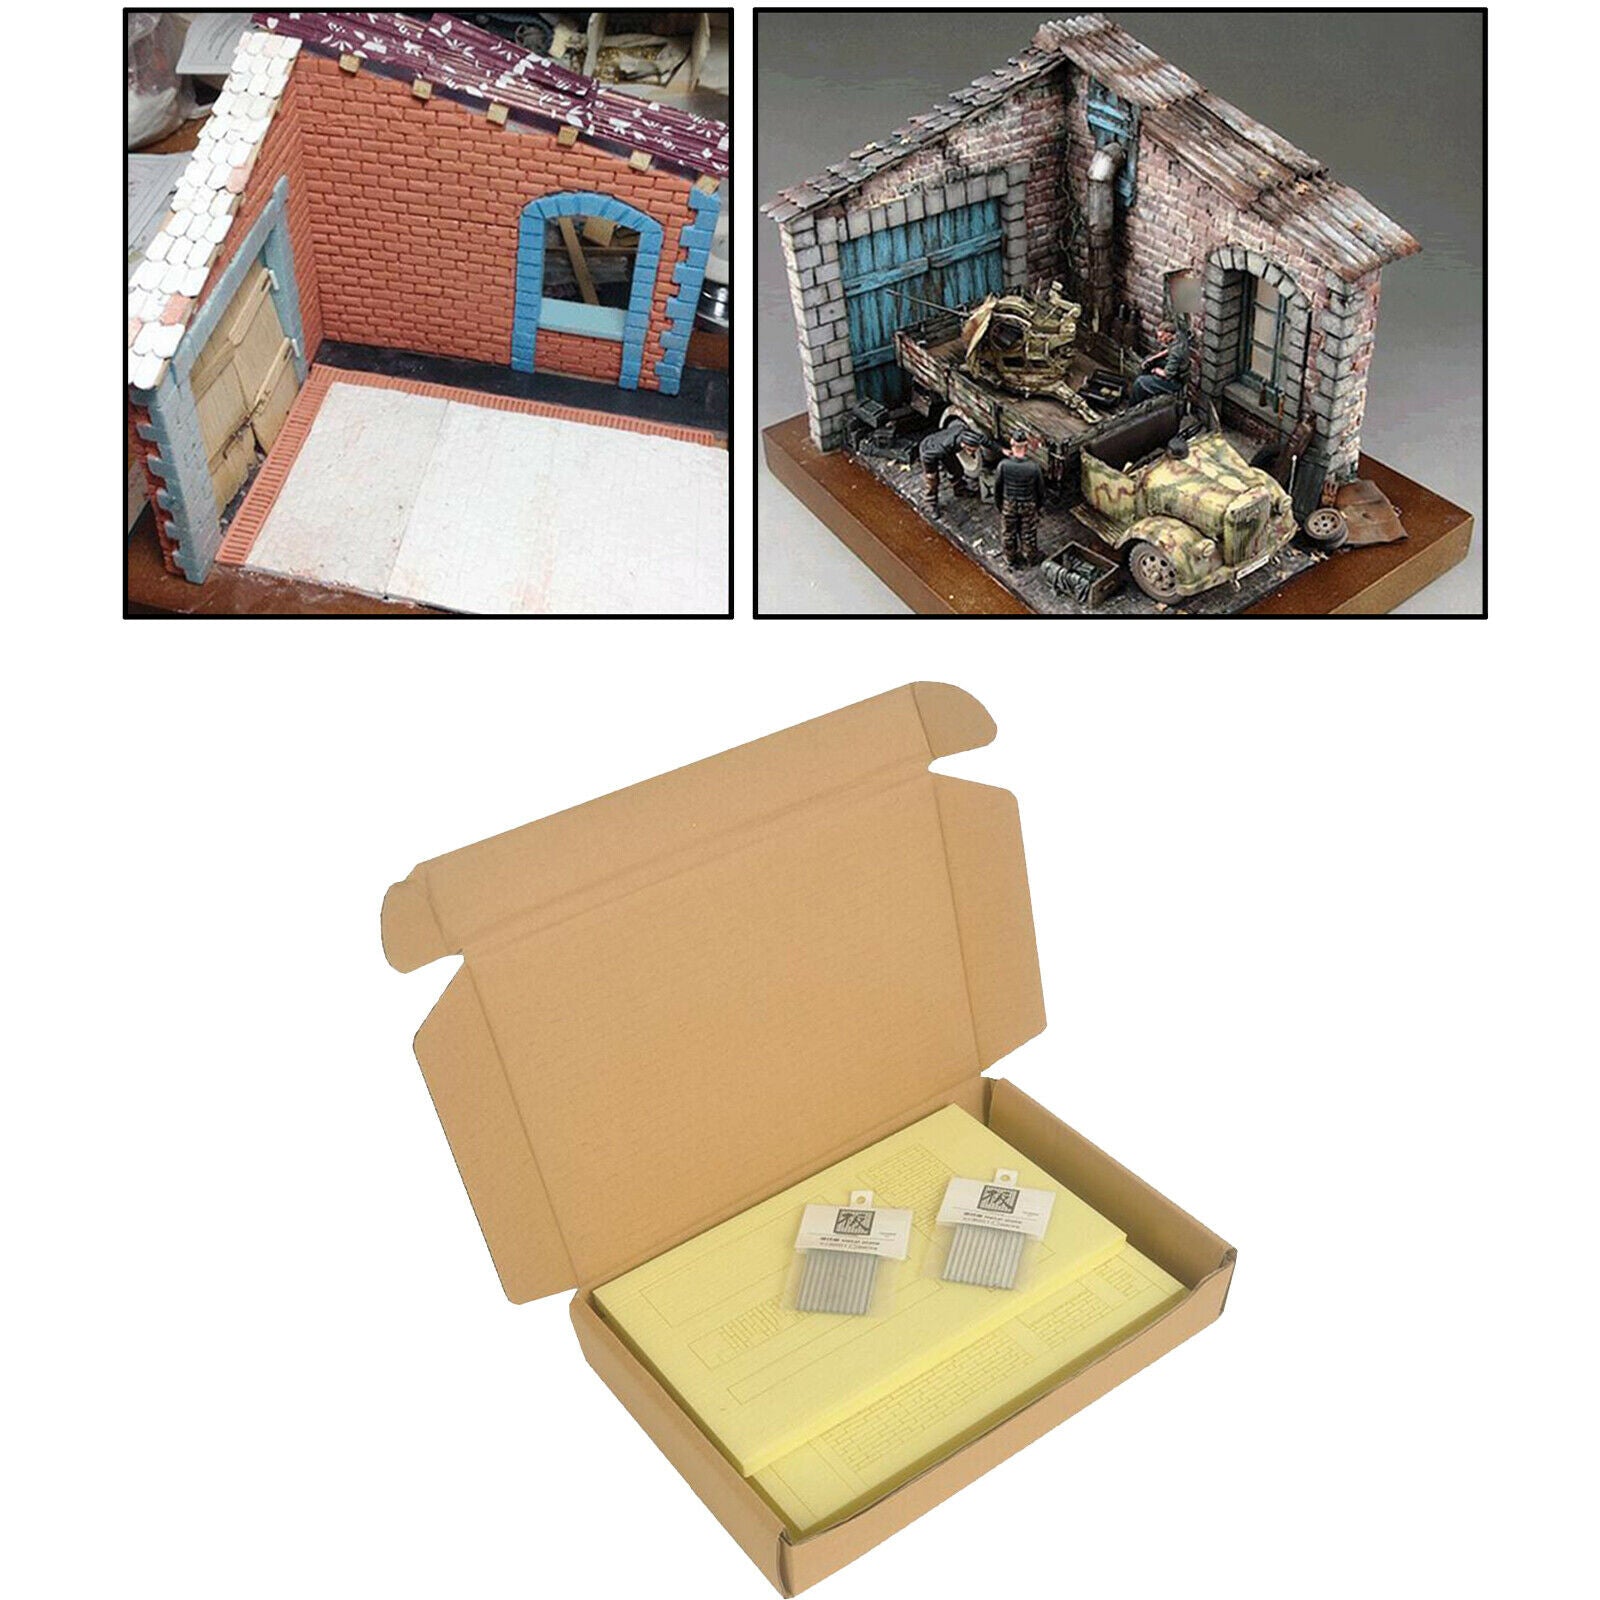 Hobby Building Puzzles Kits Ruins House Architecture 1/35 Scale War Layouts